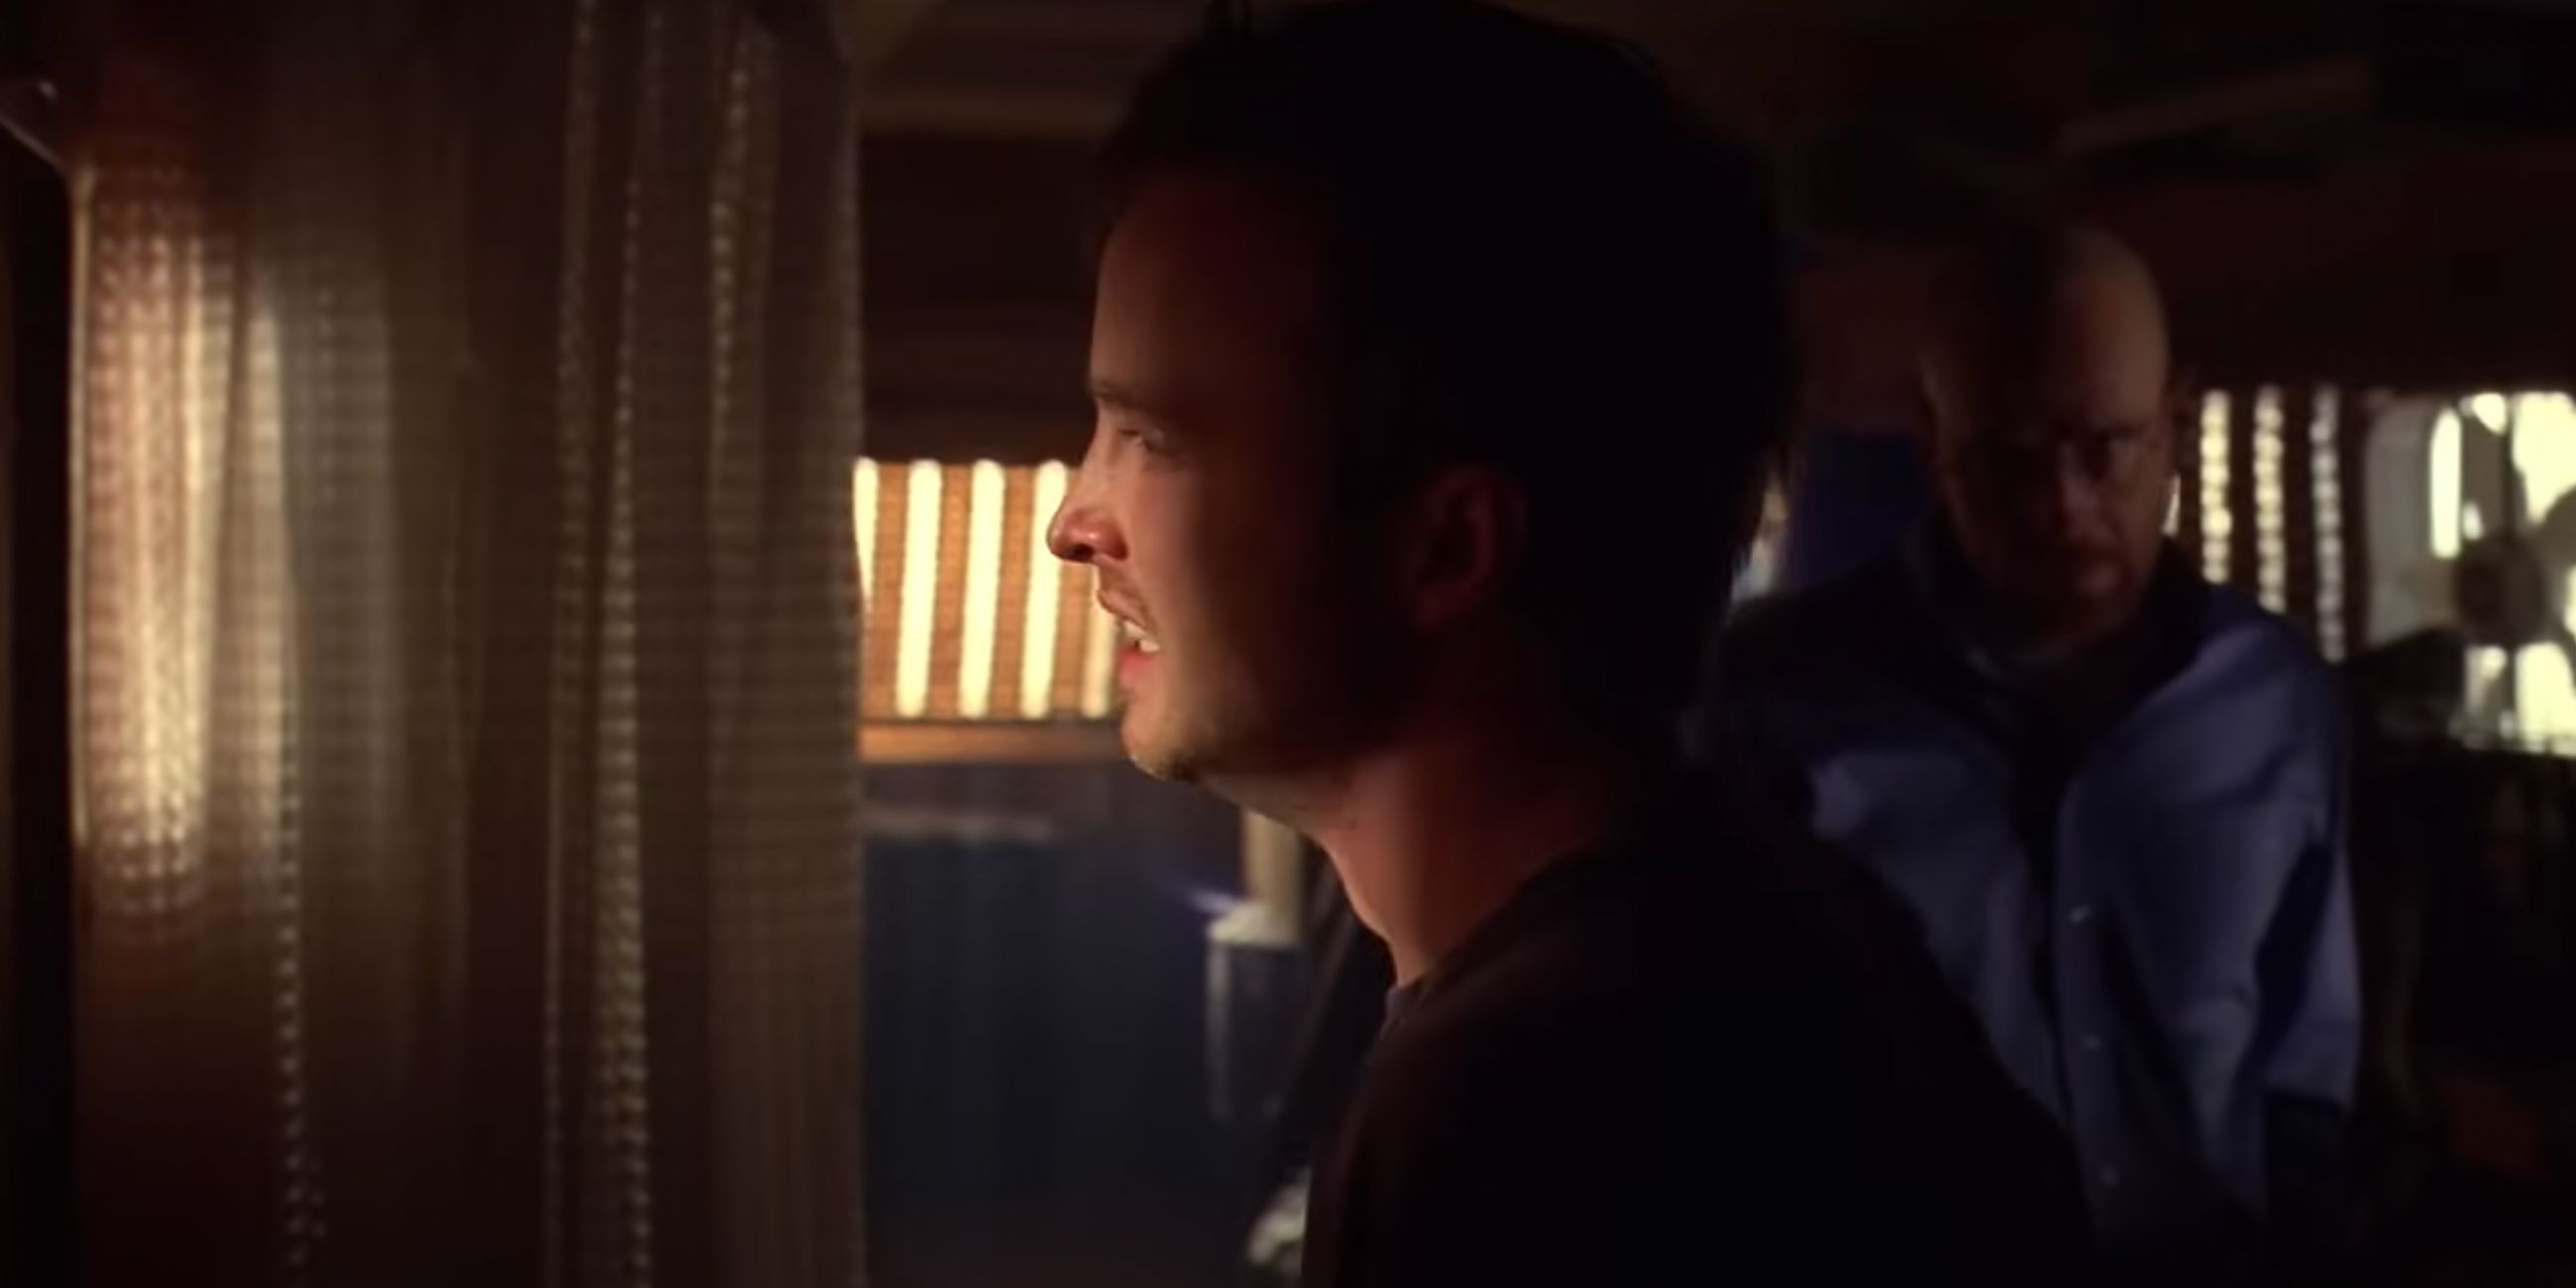 From the confines of the RV, Jesse Pinkman is instructed by Walter to tell Hank that he won't be disturbed.